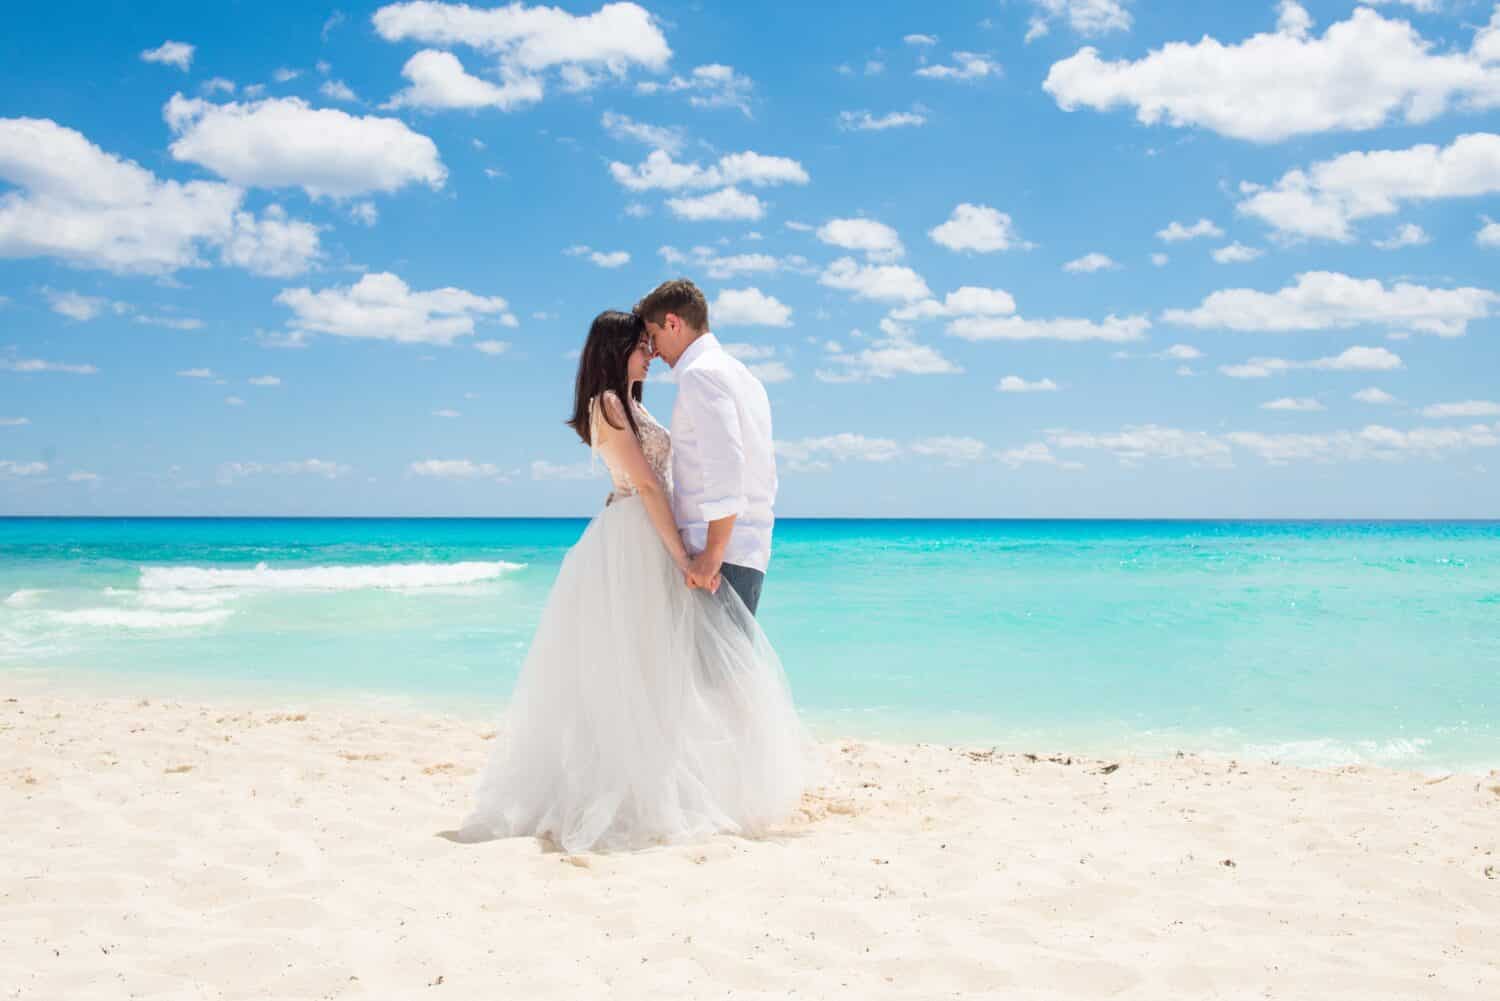 A married couple holding their hands and looking into their eyes. A wedding on the beach-shore. Honey moon on the paradise island. White sand, turquoise sea waters. 